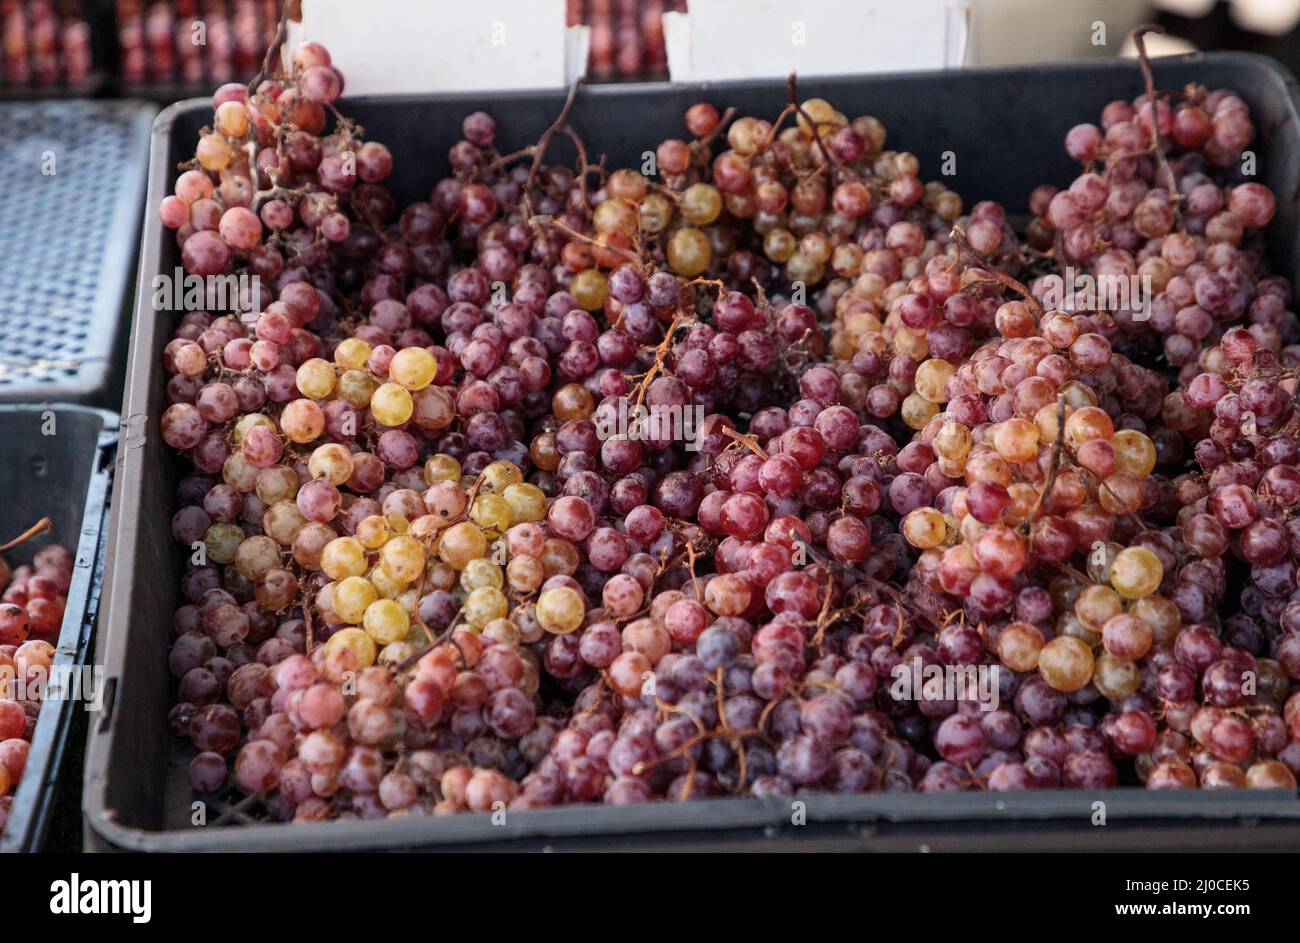 Bunches of Red flame grapes in a basket sold at a farmers market Stock Photo